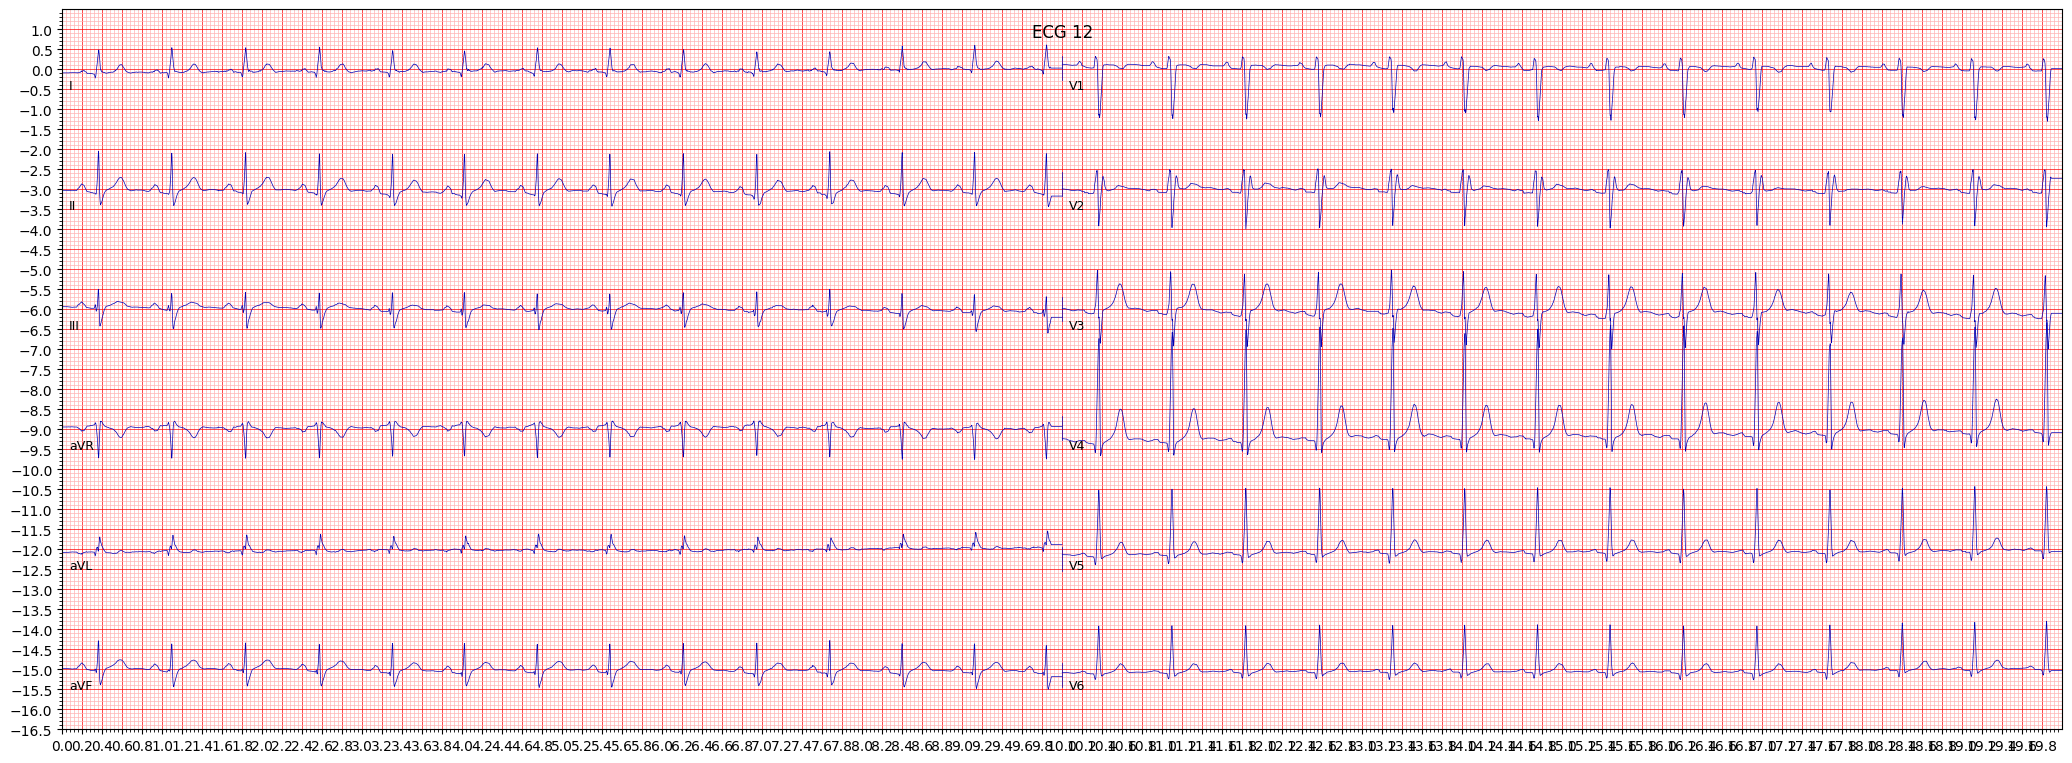 incomplete right bundle branch block (IRBBB) example 192